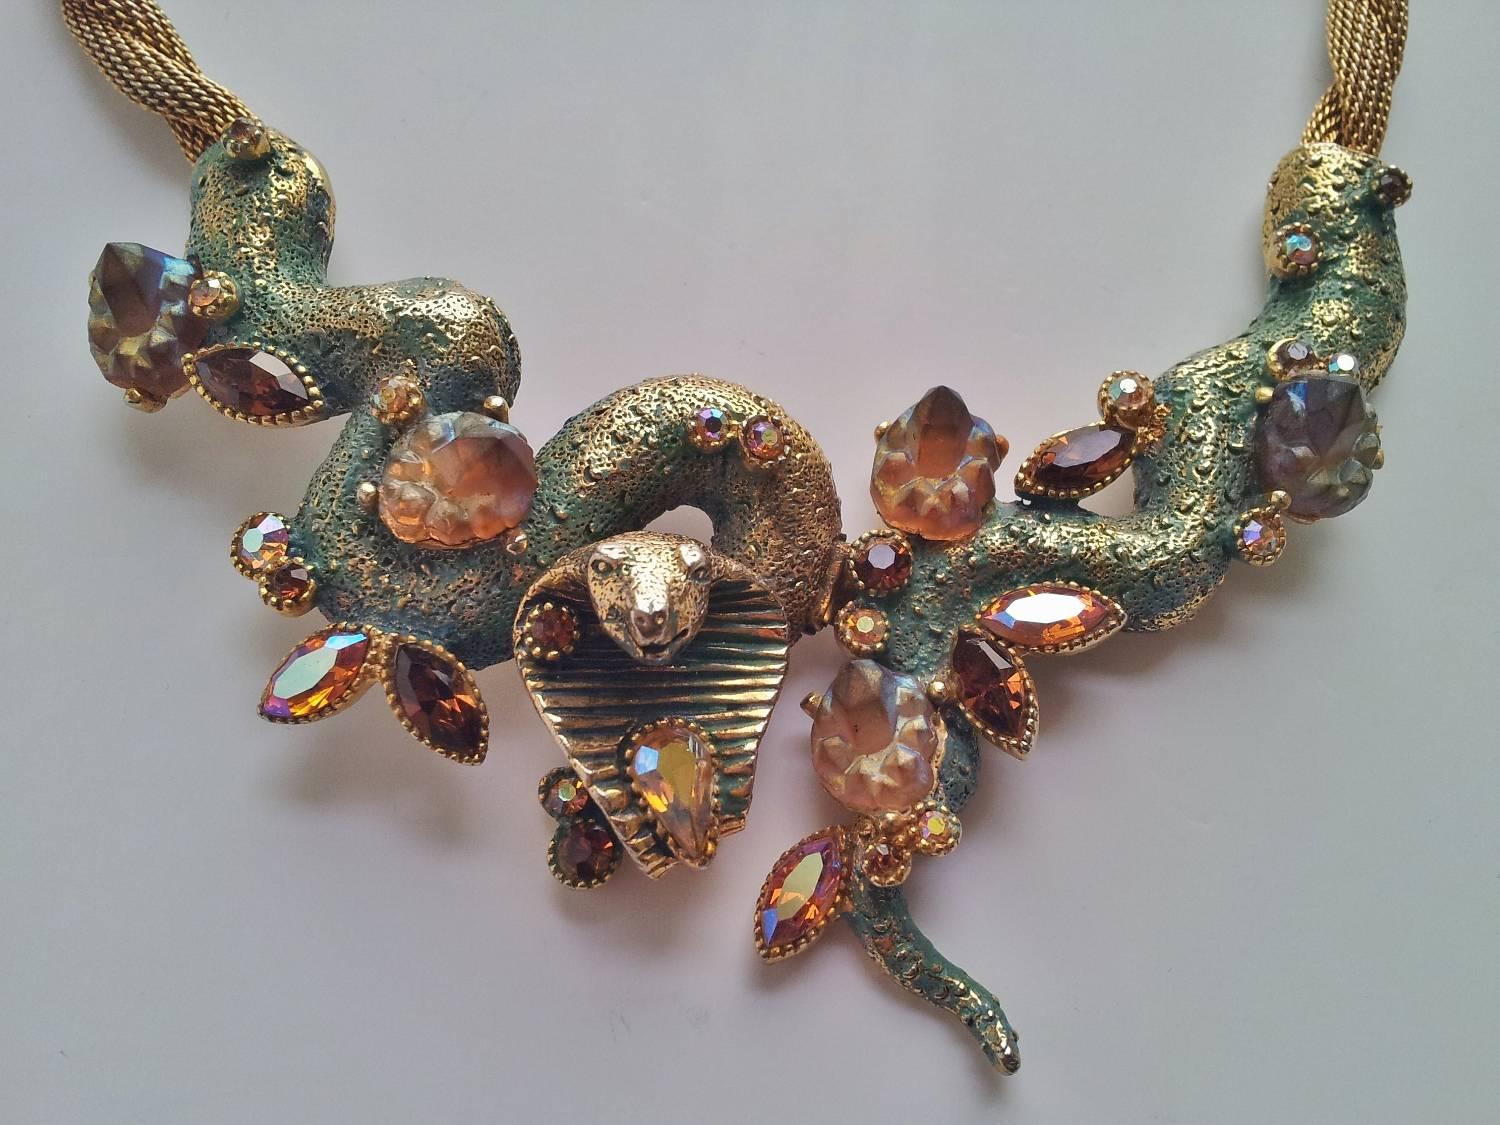 HAR serpent or cobra necklace, bracelet & earrings of enamelled gold tone and rhinestones 1959, New York. This is the company`s most sought after and collectible fantasy set and part of costume jewellery history. This is an eye-catching conversation